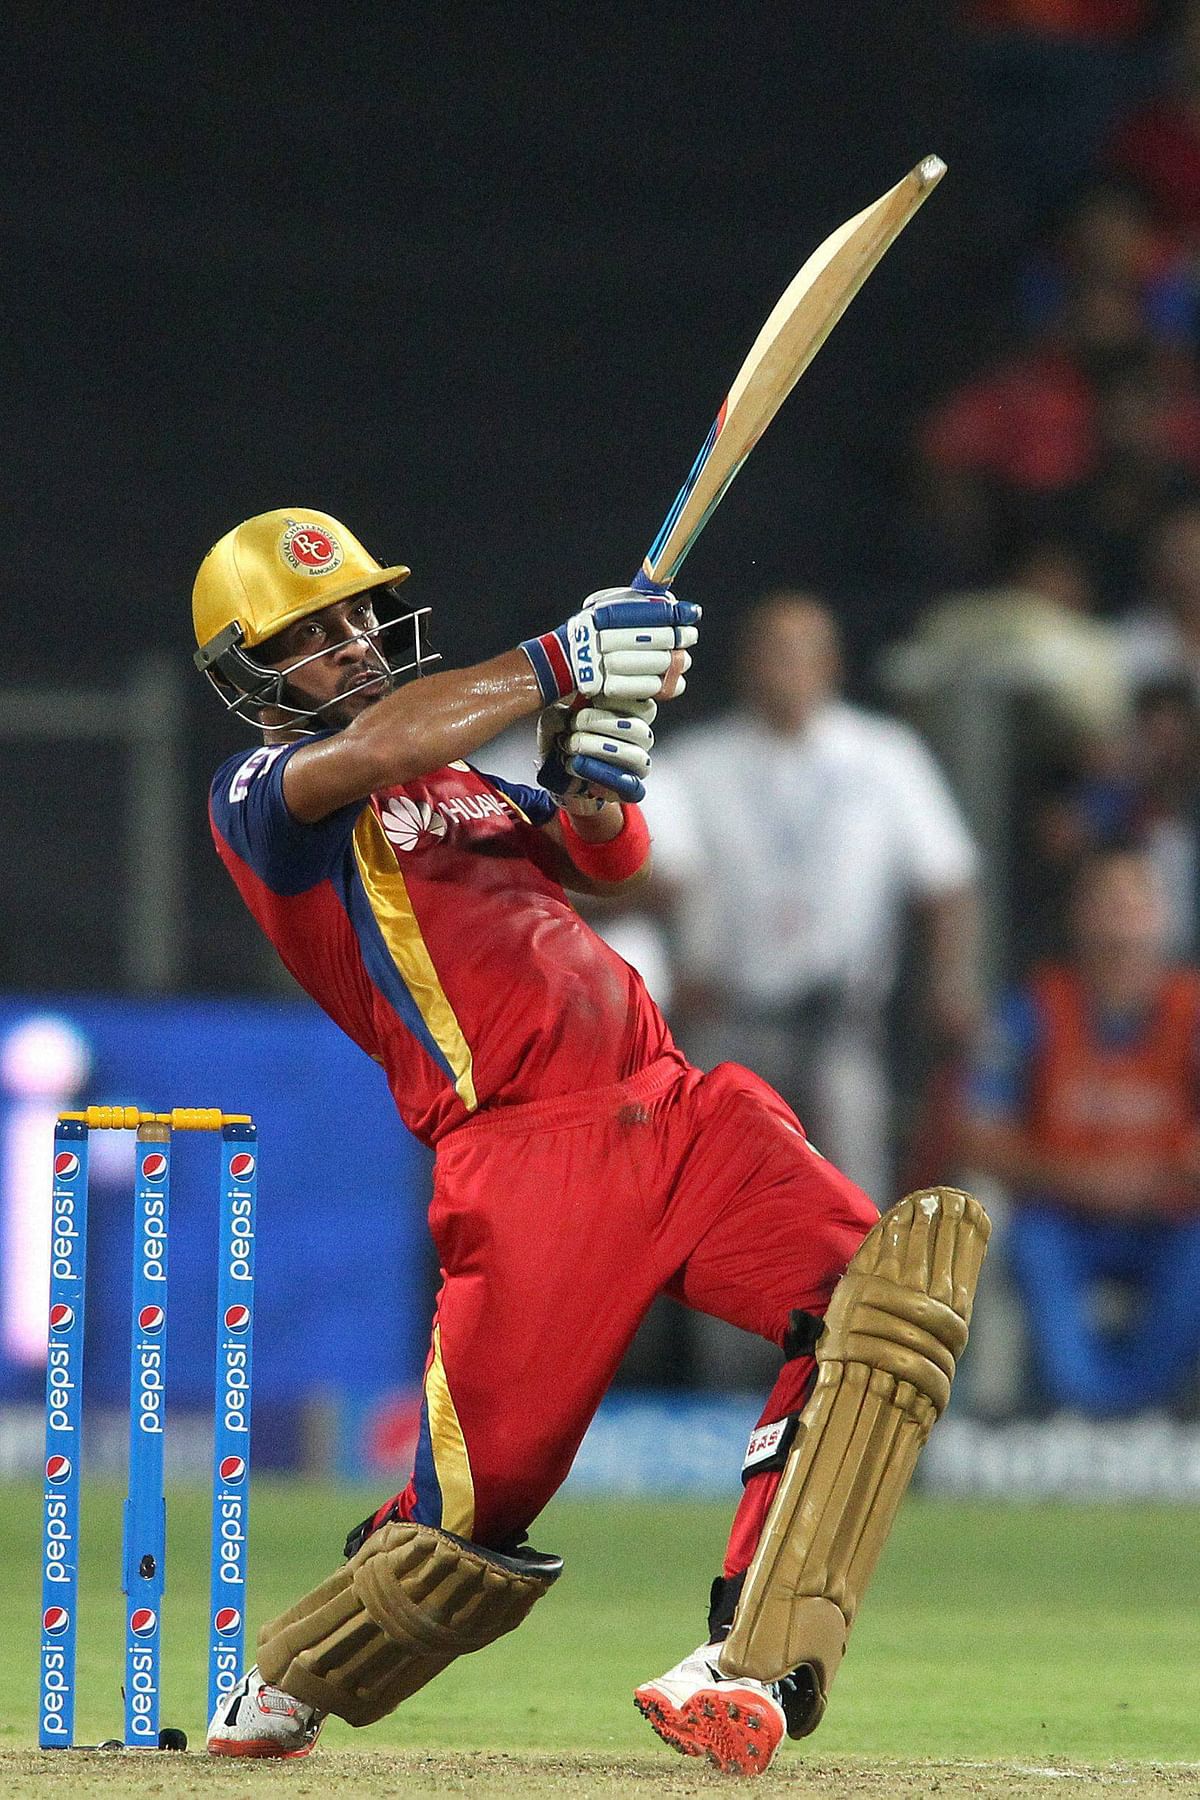 Royal Challengers Bangalore thump Rajasthan Royals to make it to Qualifier 2 against Chennai Super Kings. 